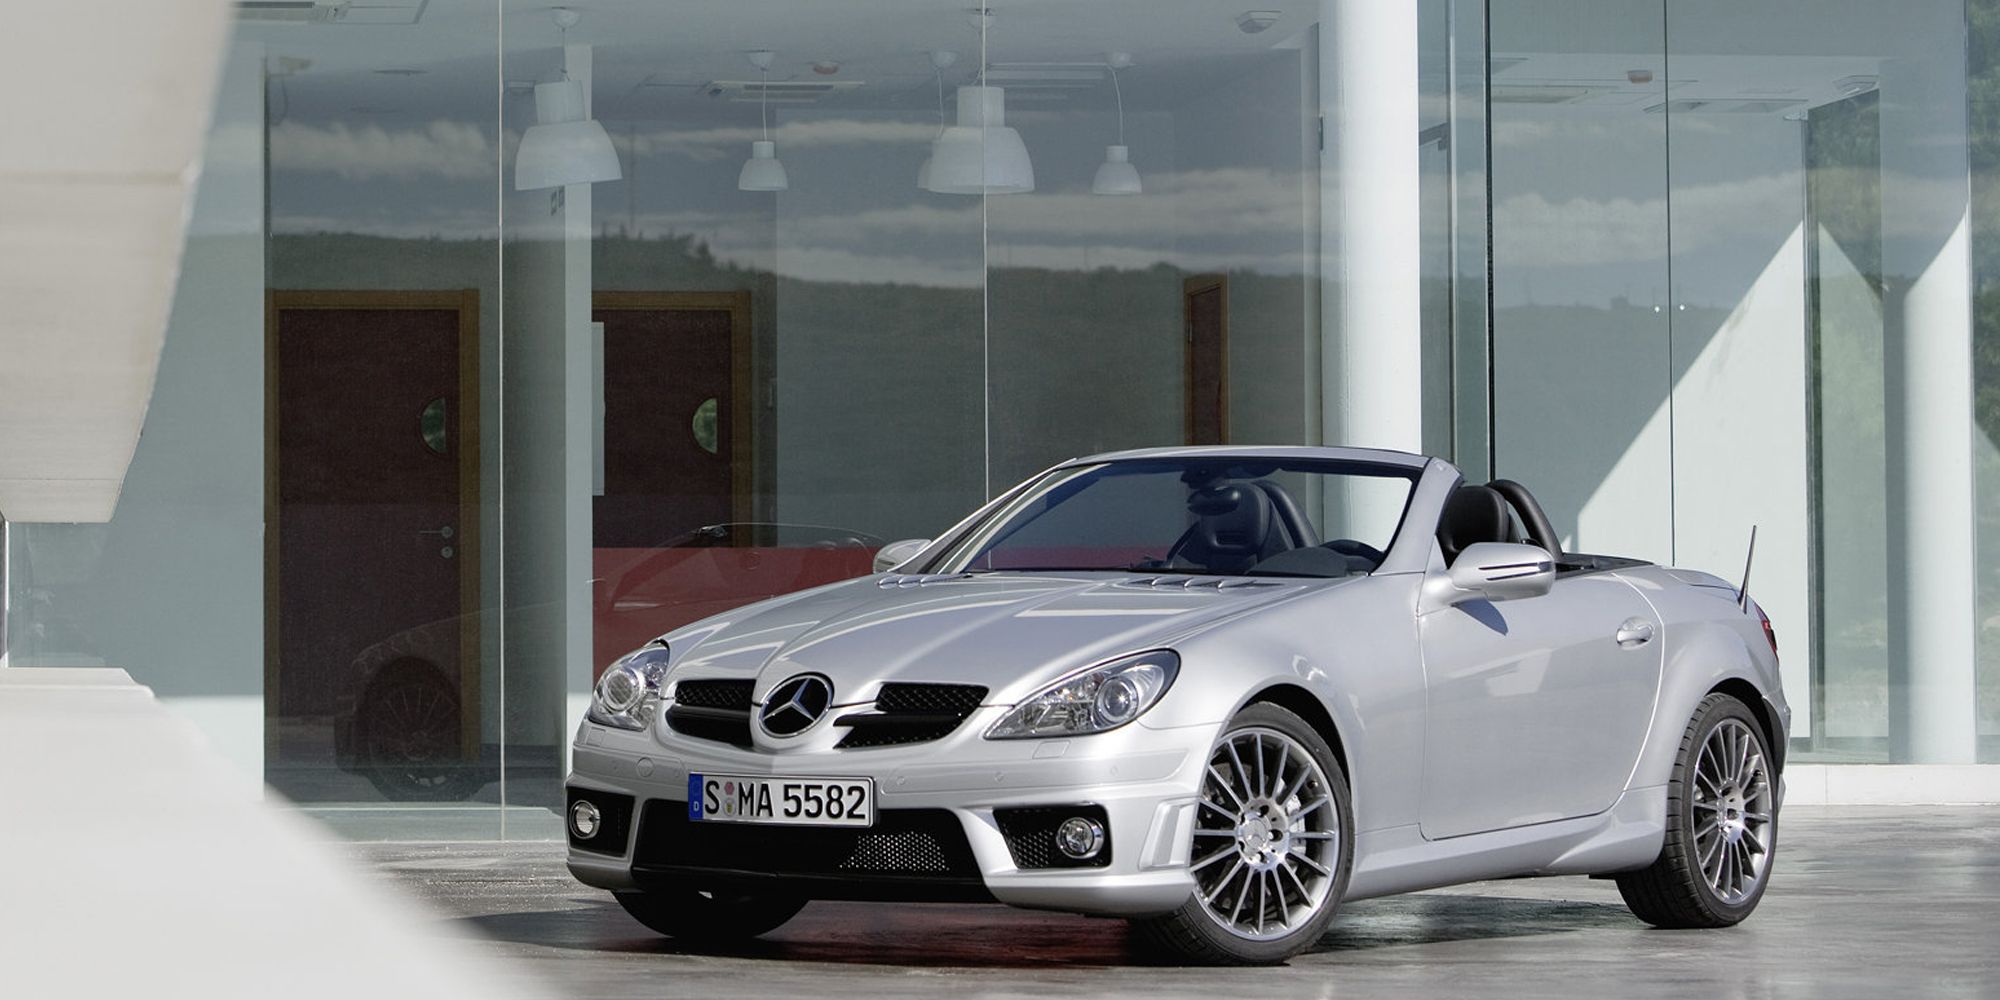 Front 3/4 view of the SLK 55 AMG